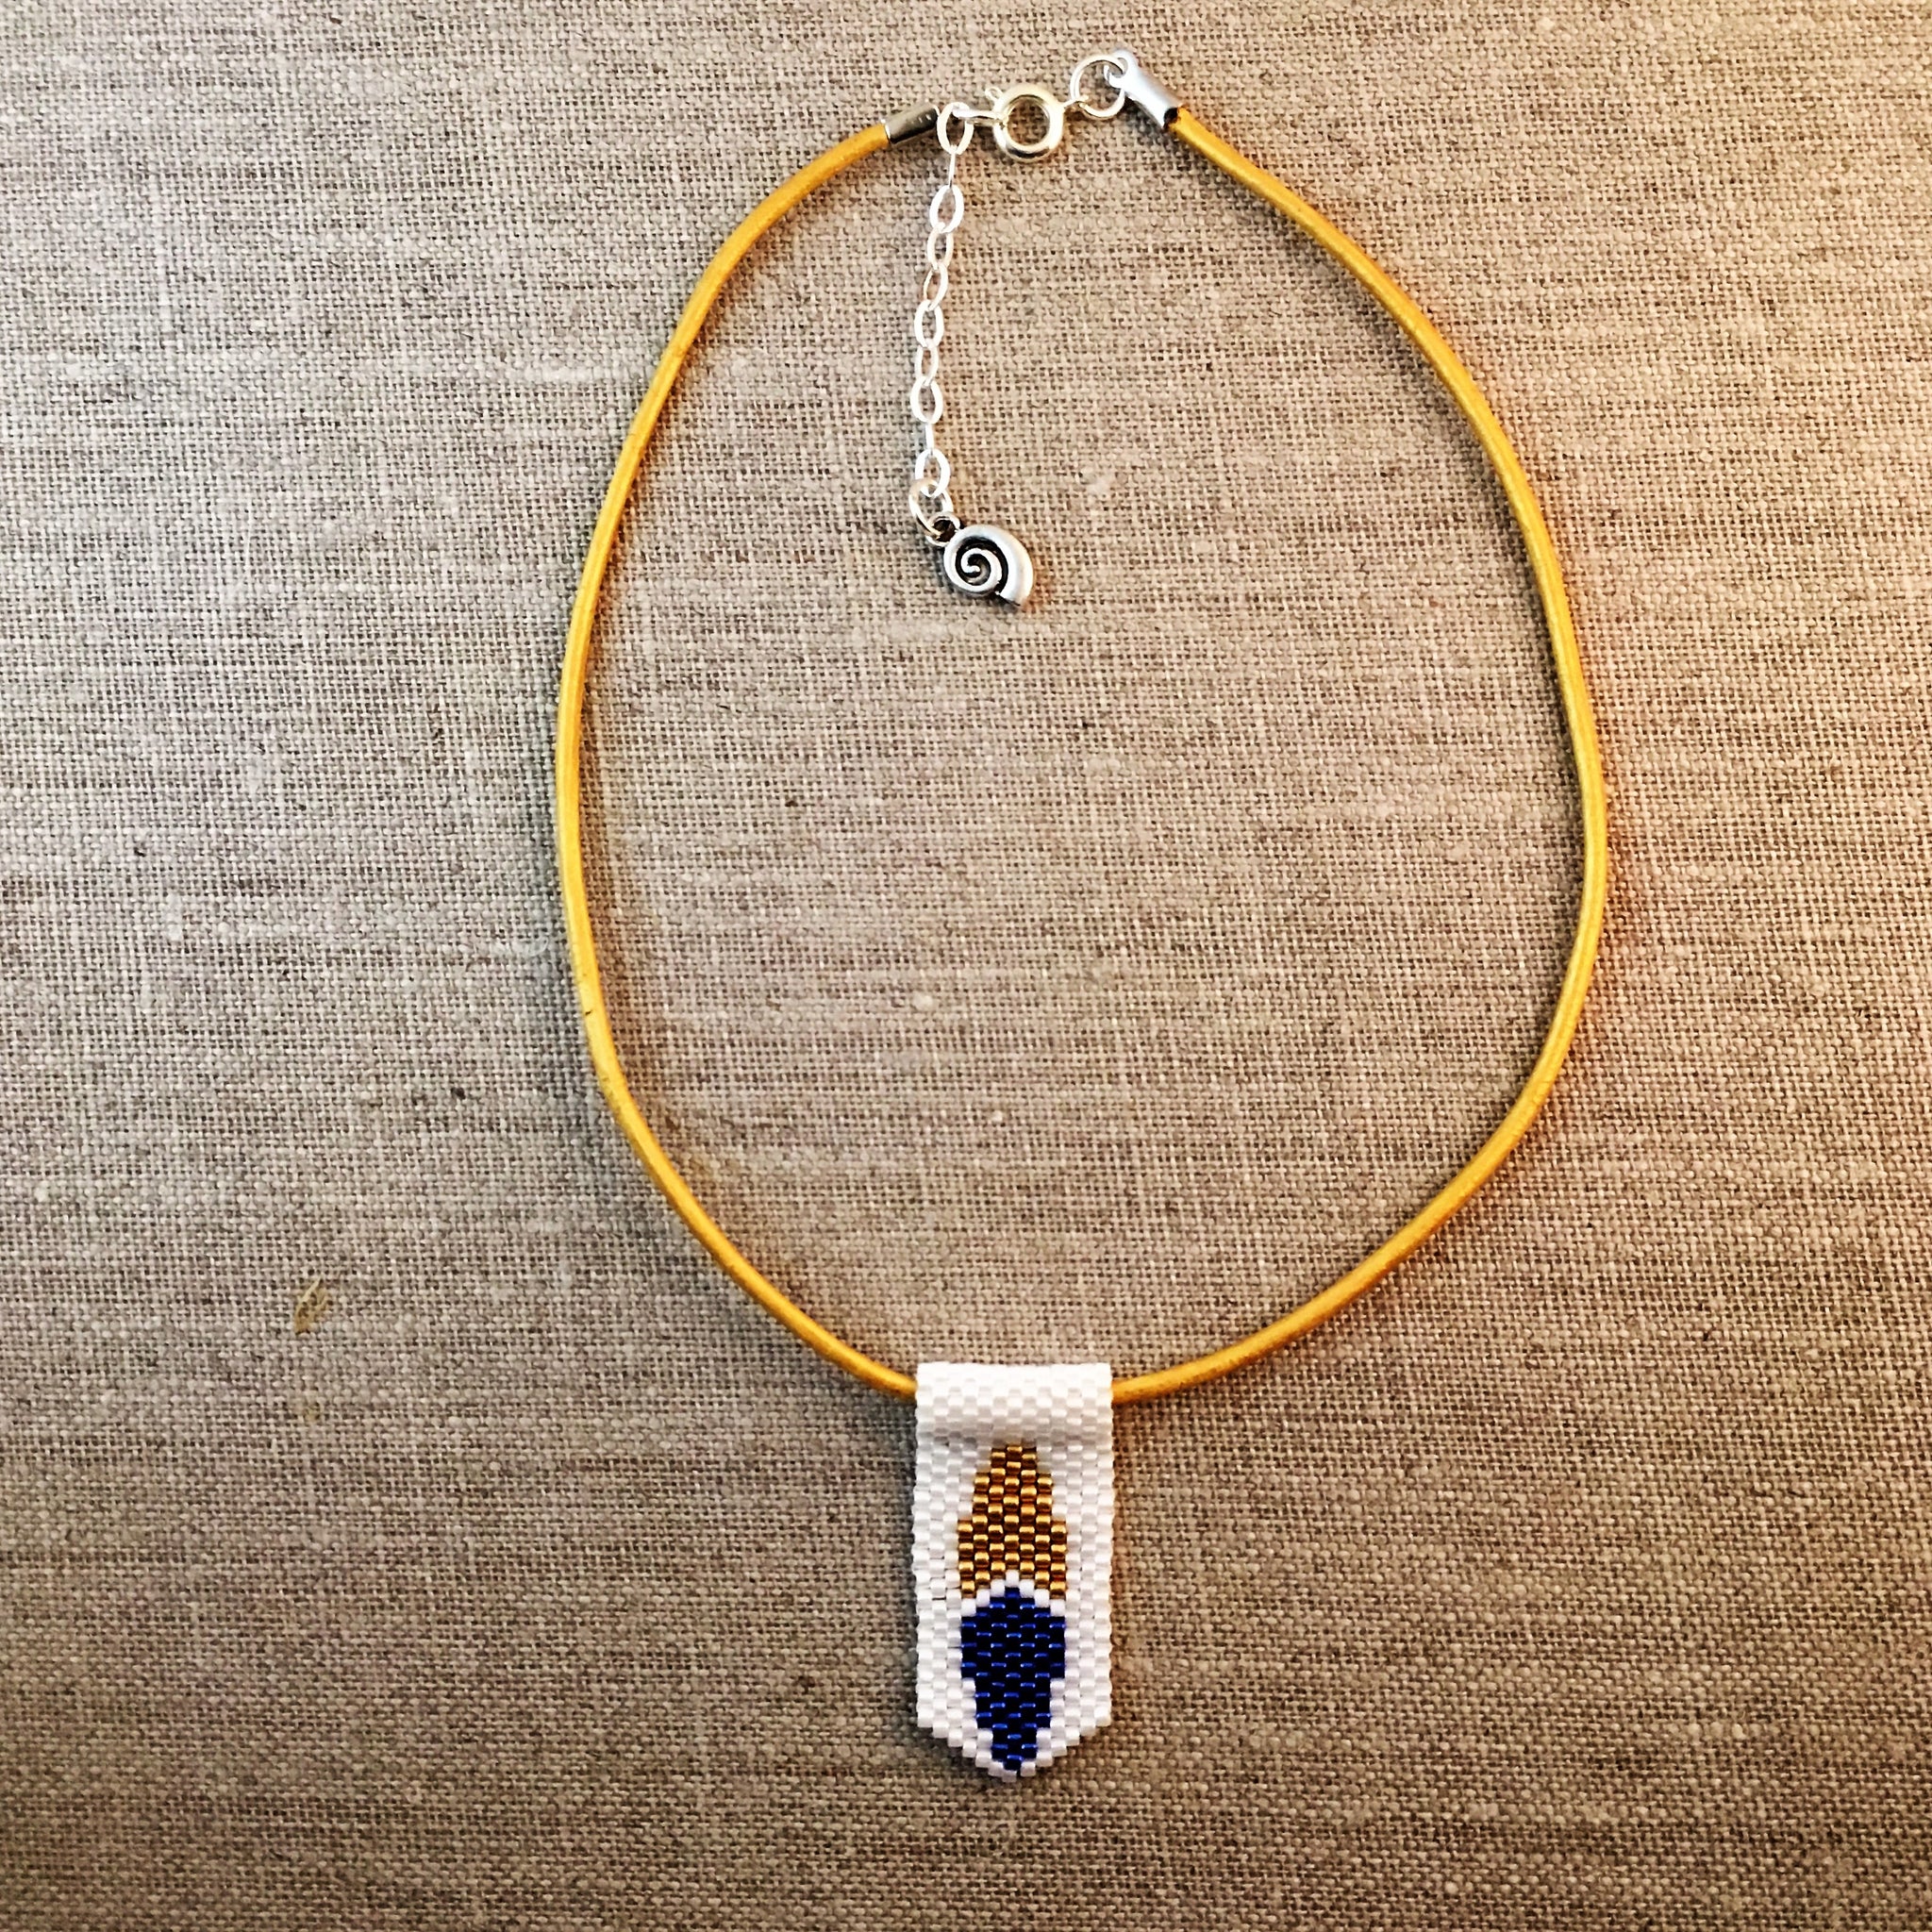 Mini Surfboard Pendant Necklace in Blue, Gold and White